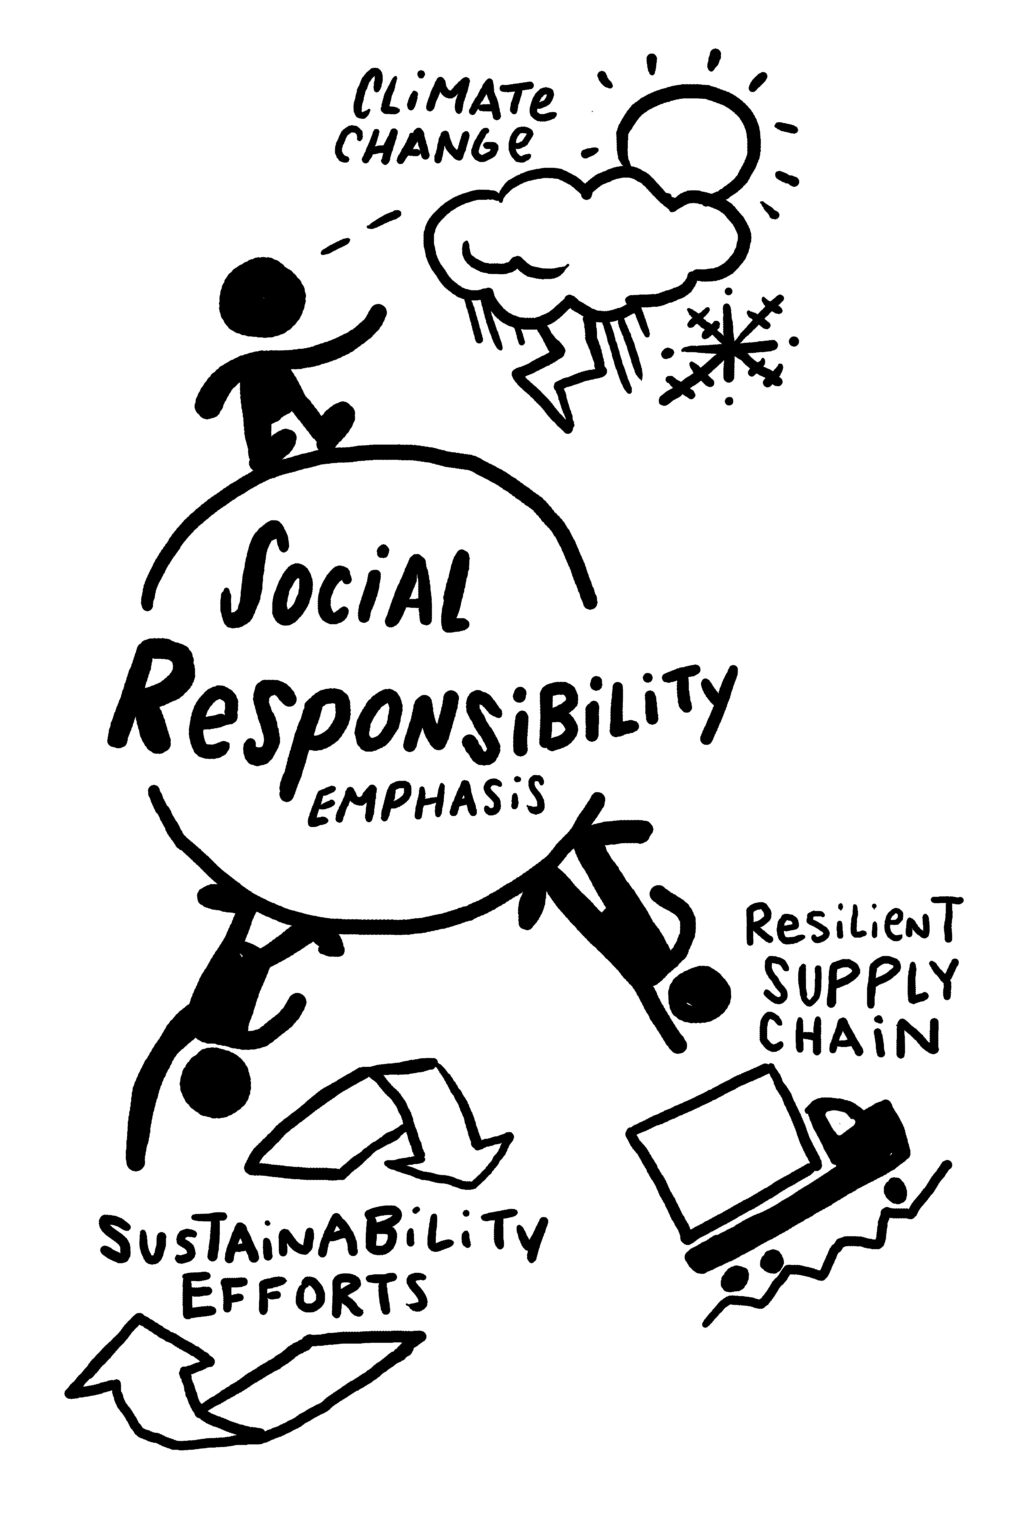 A CSR illustration with three elements: climate change, sustainability efforts, and a resilient supply chain.